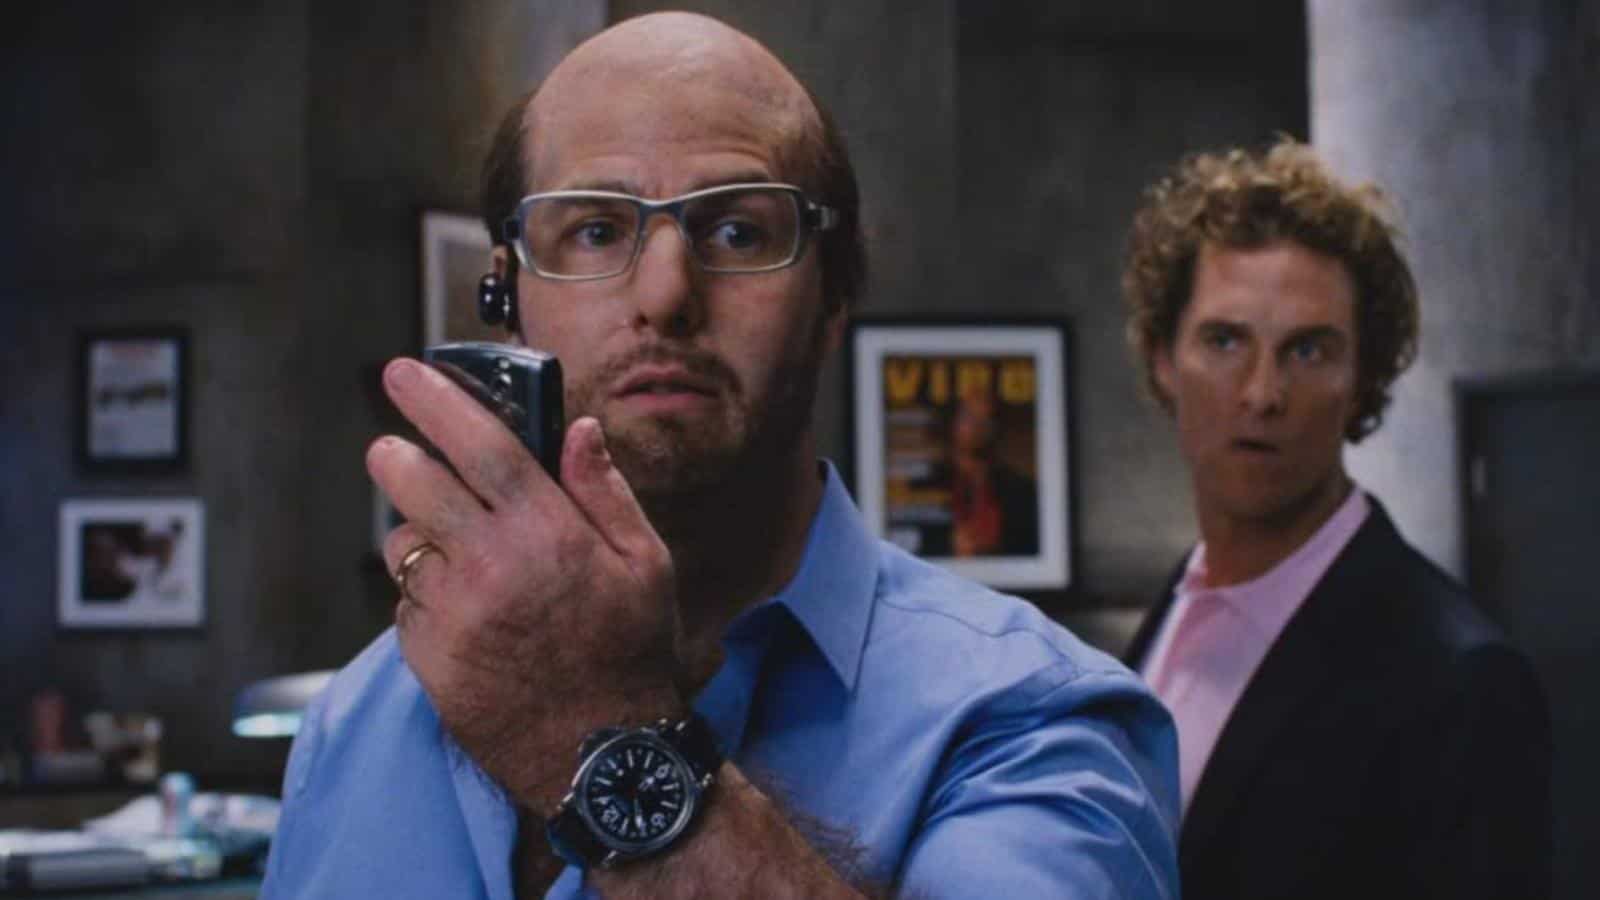 Tom Cruise - Tropic Thunder DreamWorks Pictures.